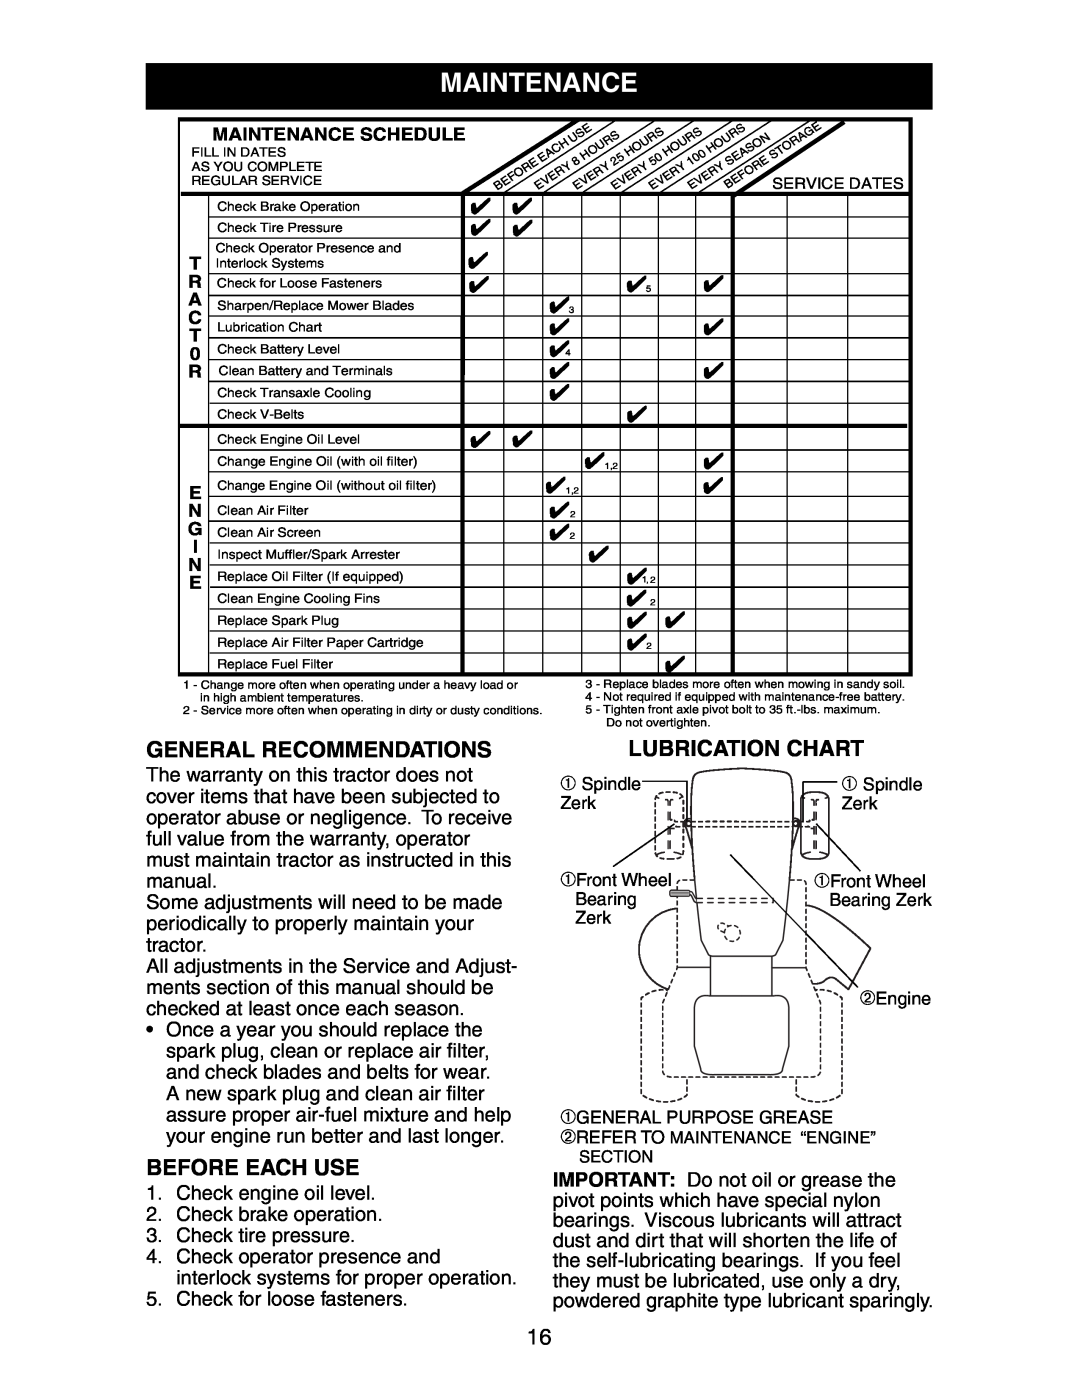 Poulan 271150 manual General Recommendations, Lubrication Chart, Before Each Use, Maintenance Schedule 